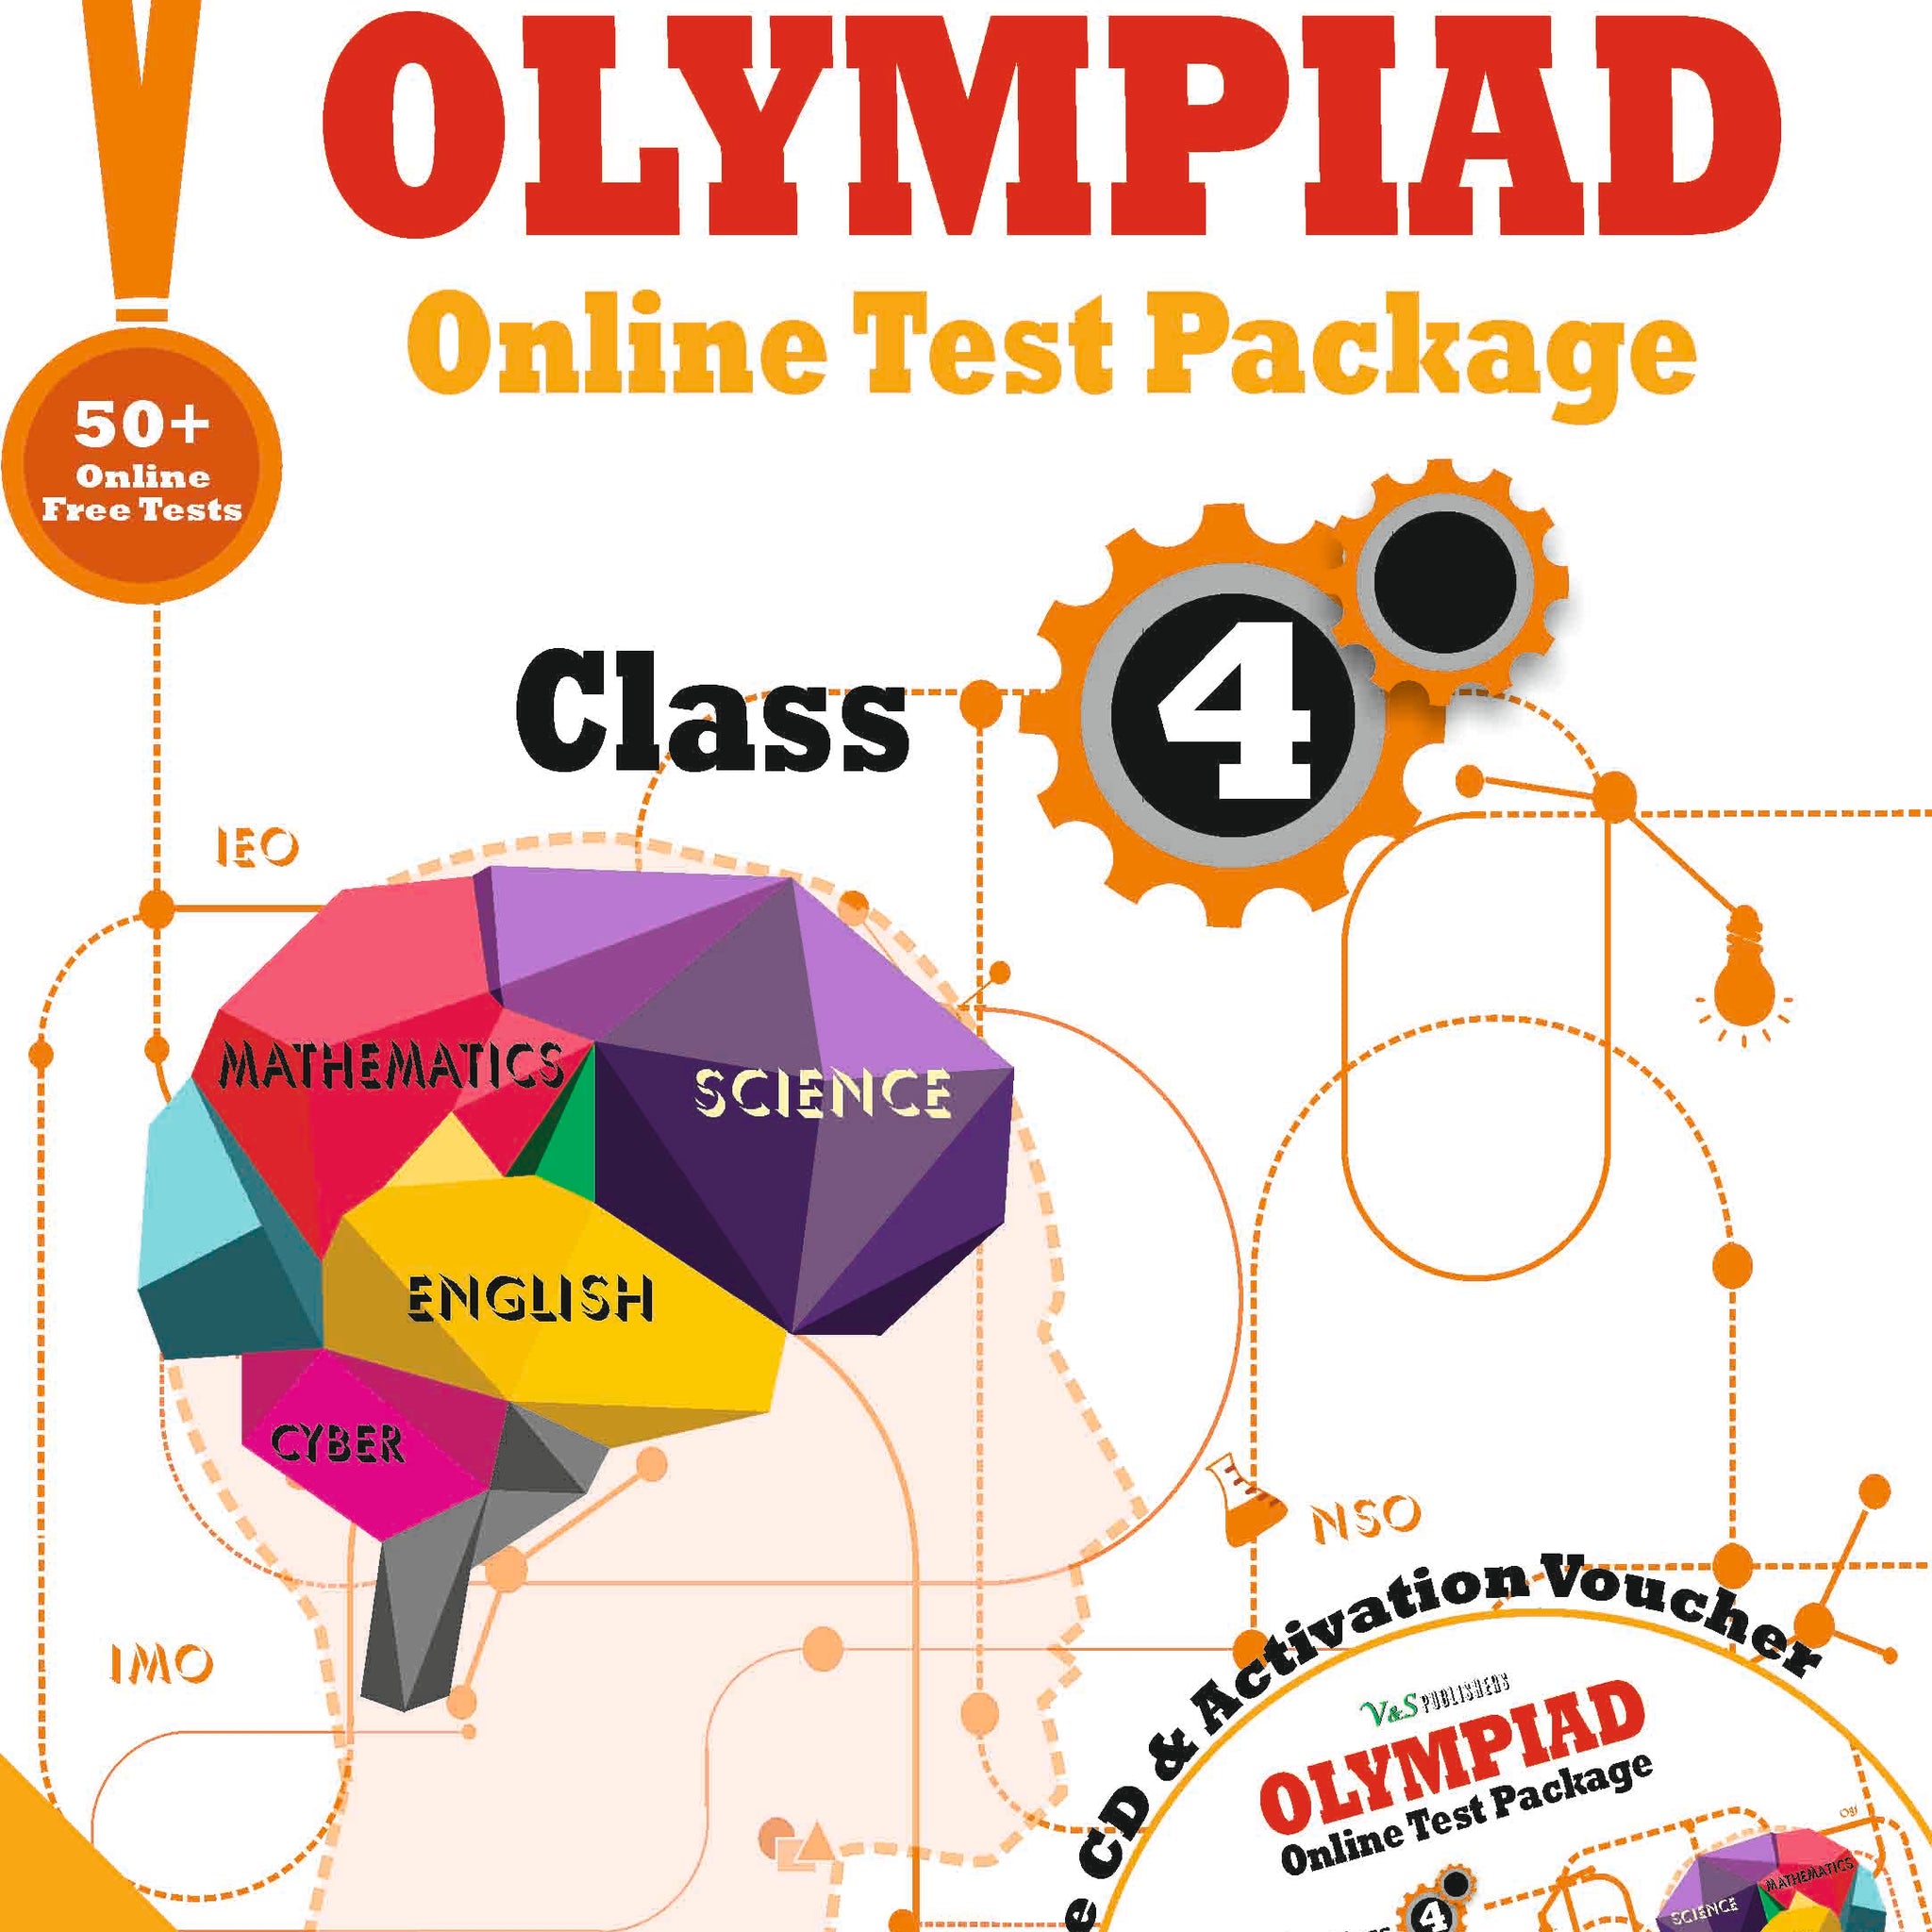 Olympiad Online Test Package Class 4 (Free CD With Activation Voucher)